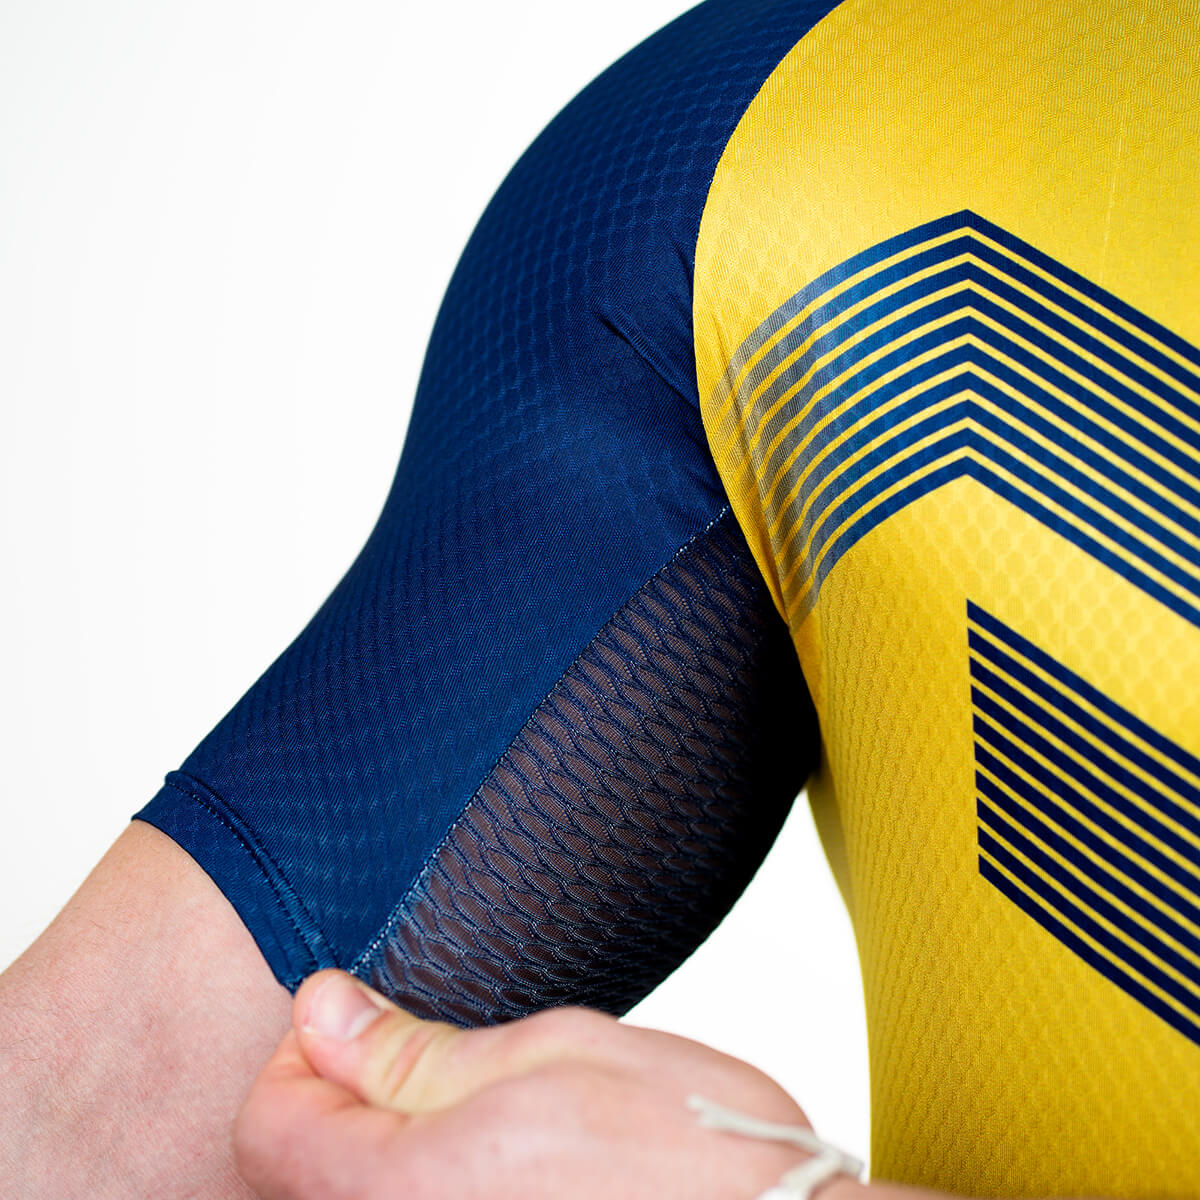 Detail of the jersey on the sleeve